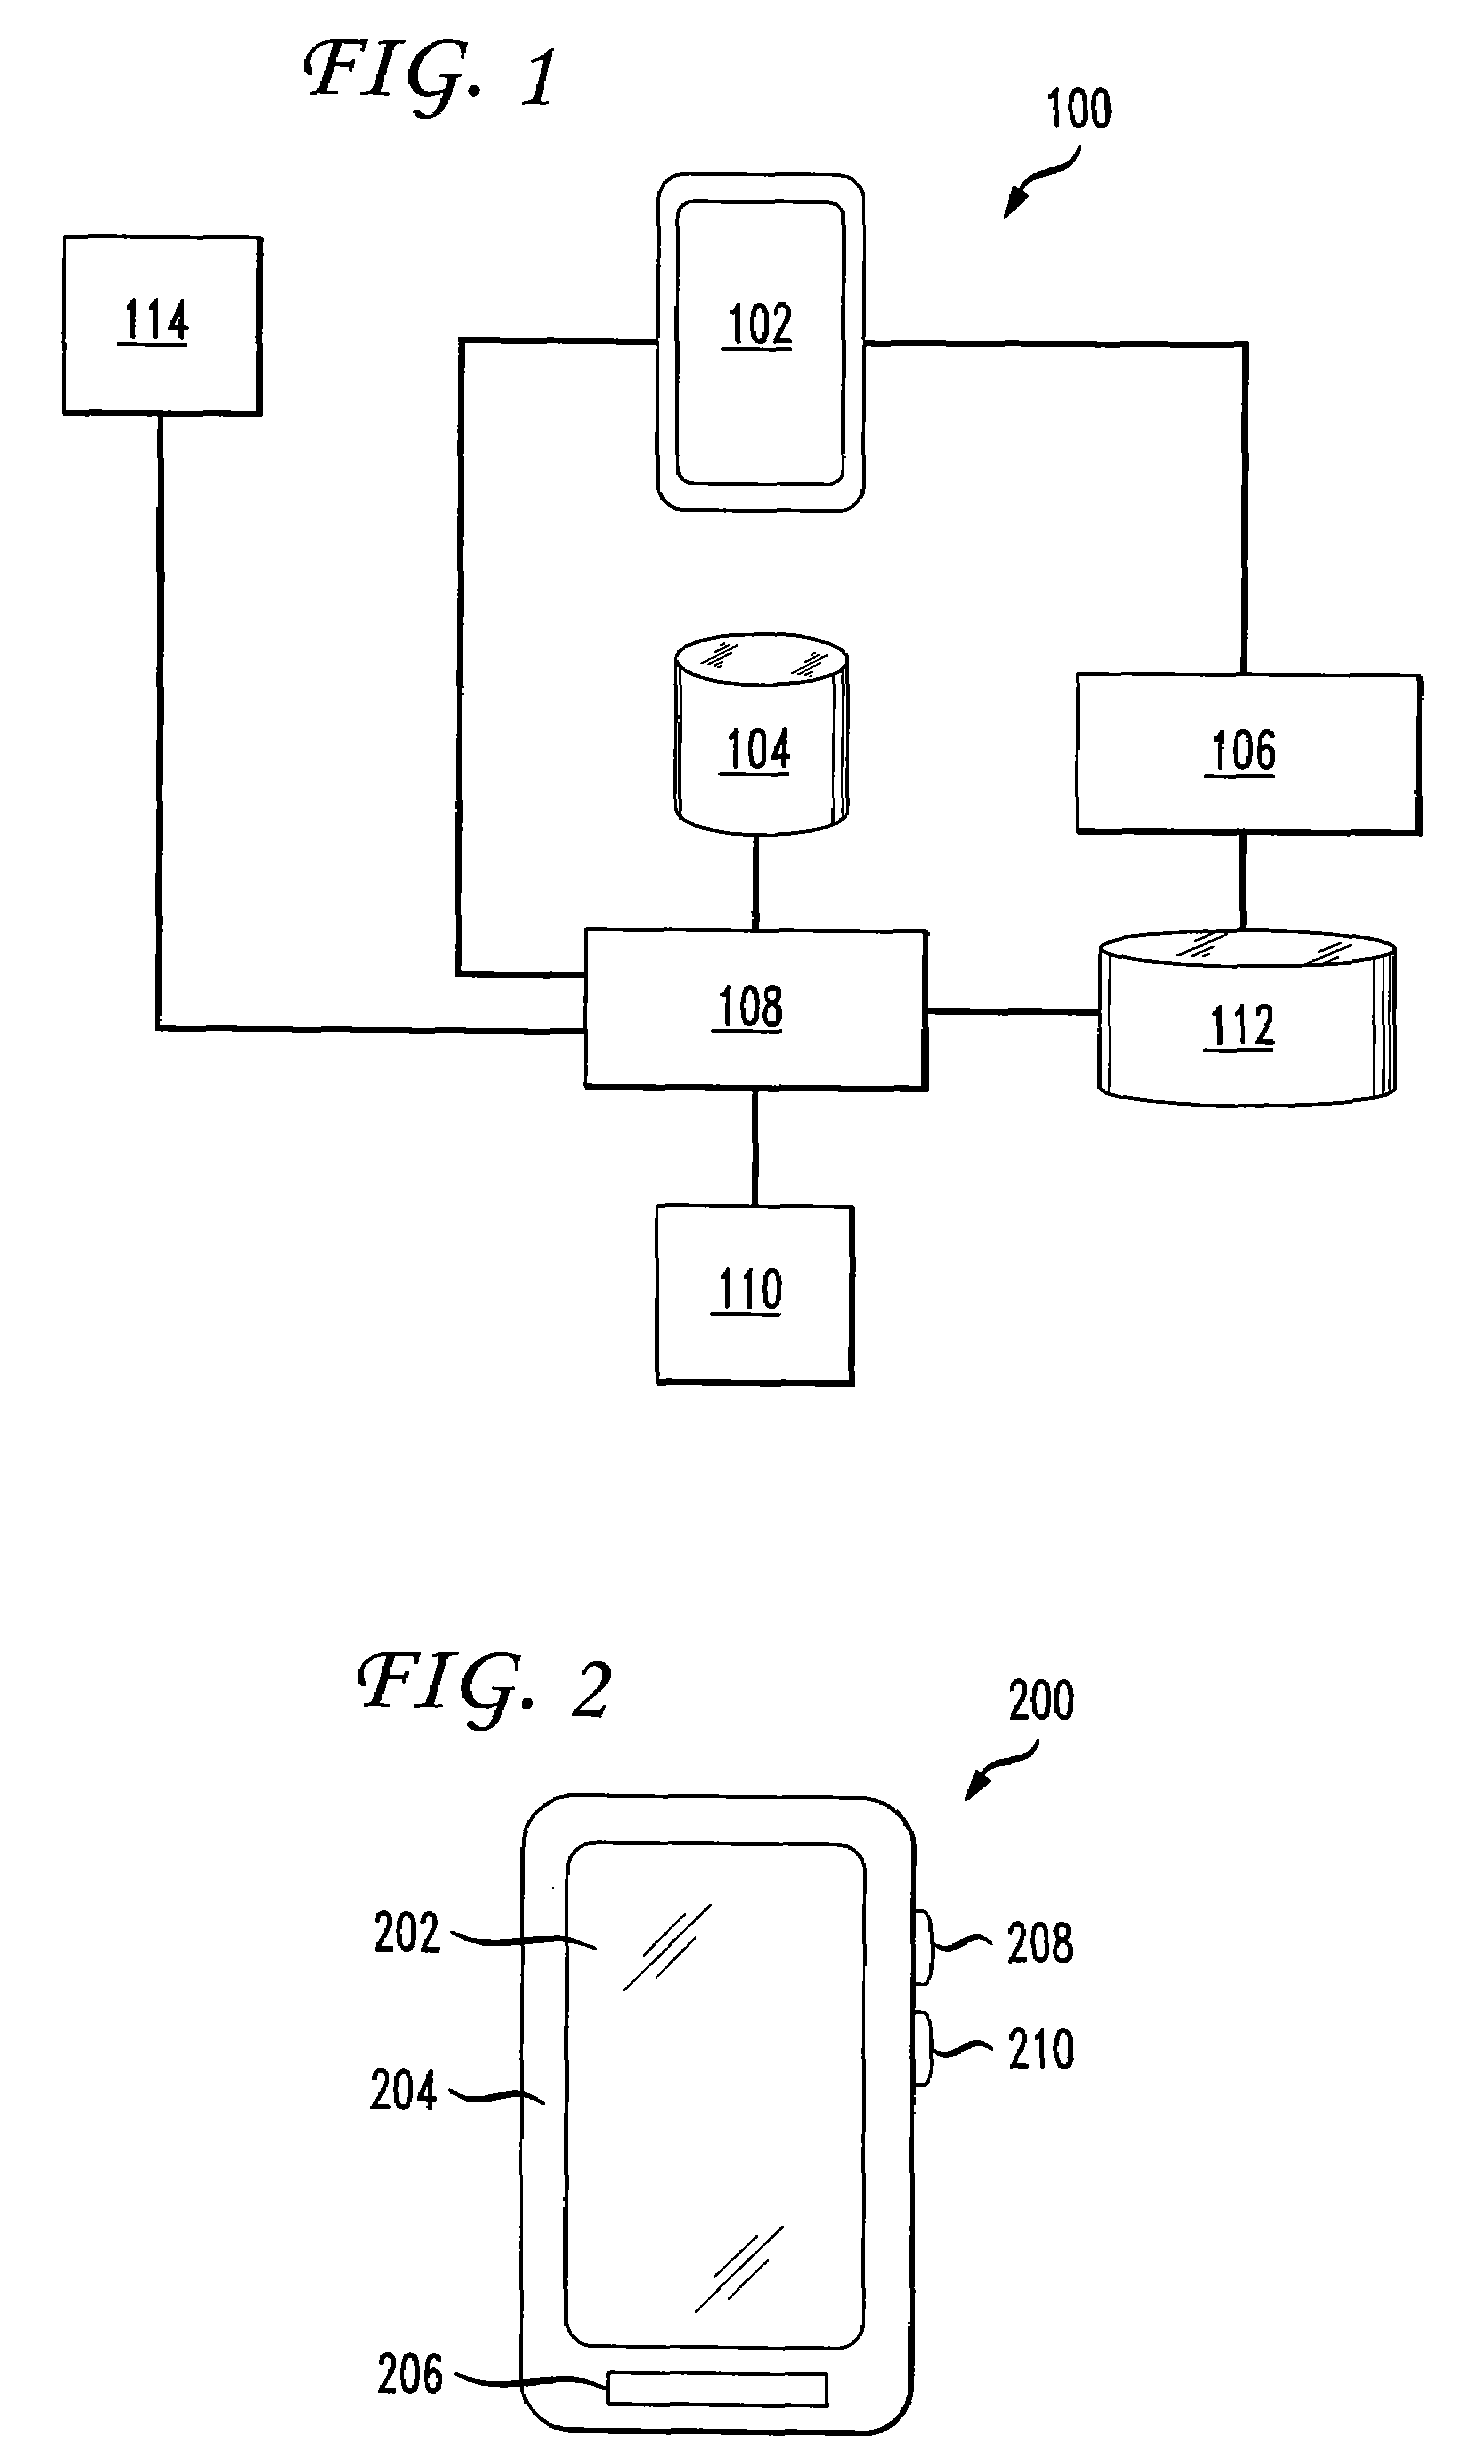 Multimodal portable communication interface for accessing video content